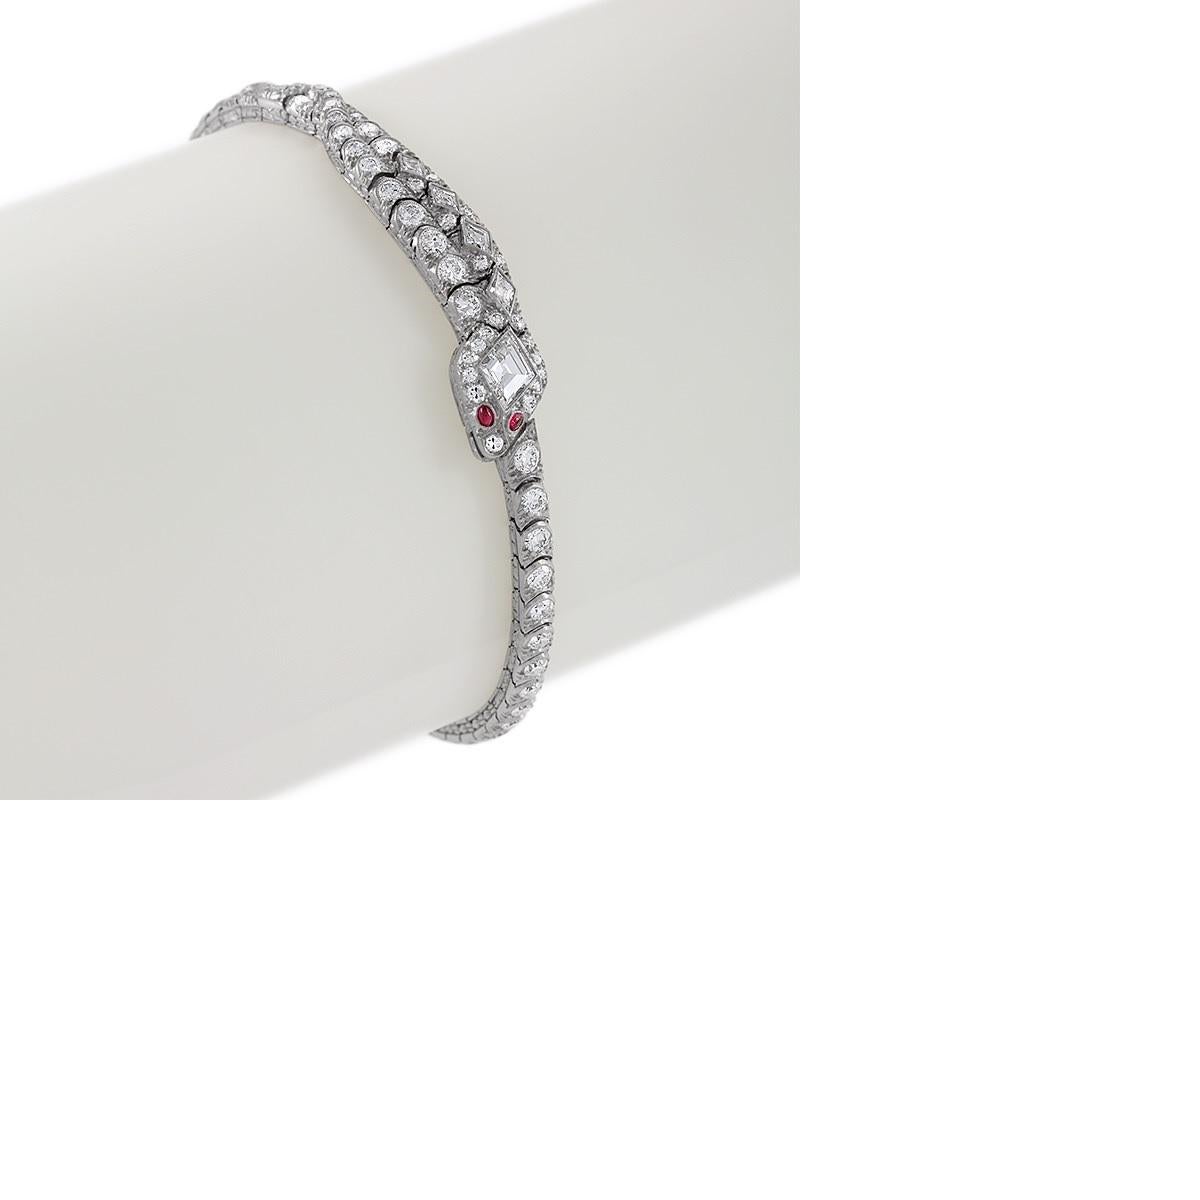 An American Art Deco platinum snake bracelet with diamonds and rubies by Oscar Heyman. The bracelet has a fancy square cut diamond head with 85 Old European cut round and square cut diamonds with an approximate total weight of 5.80 carats, and 2